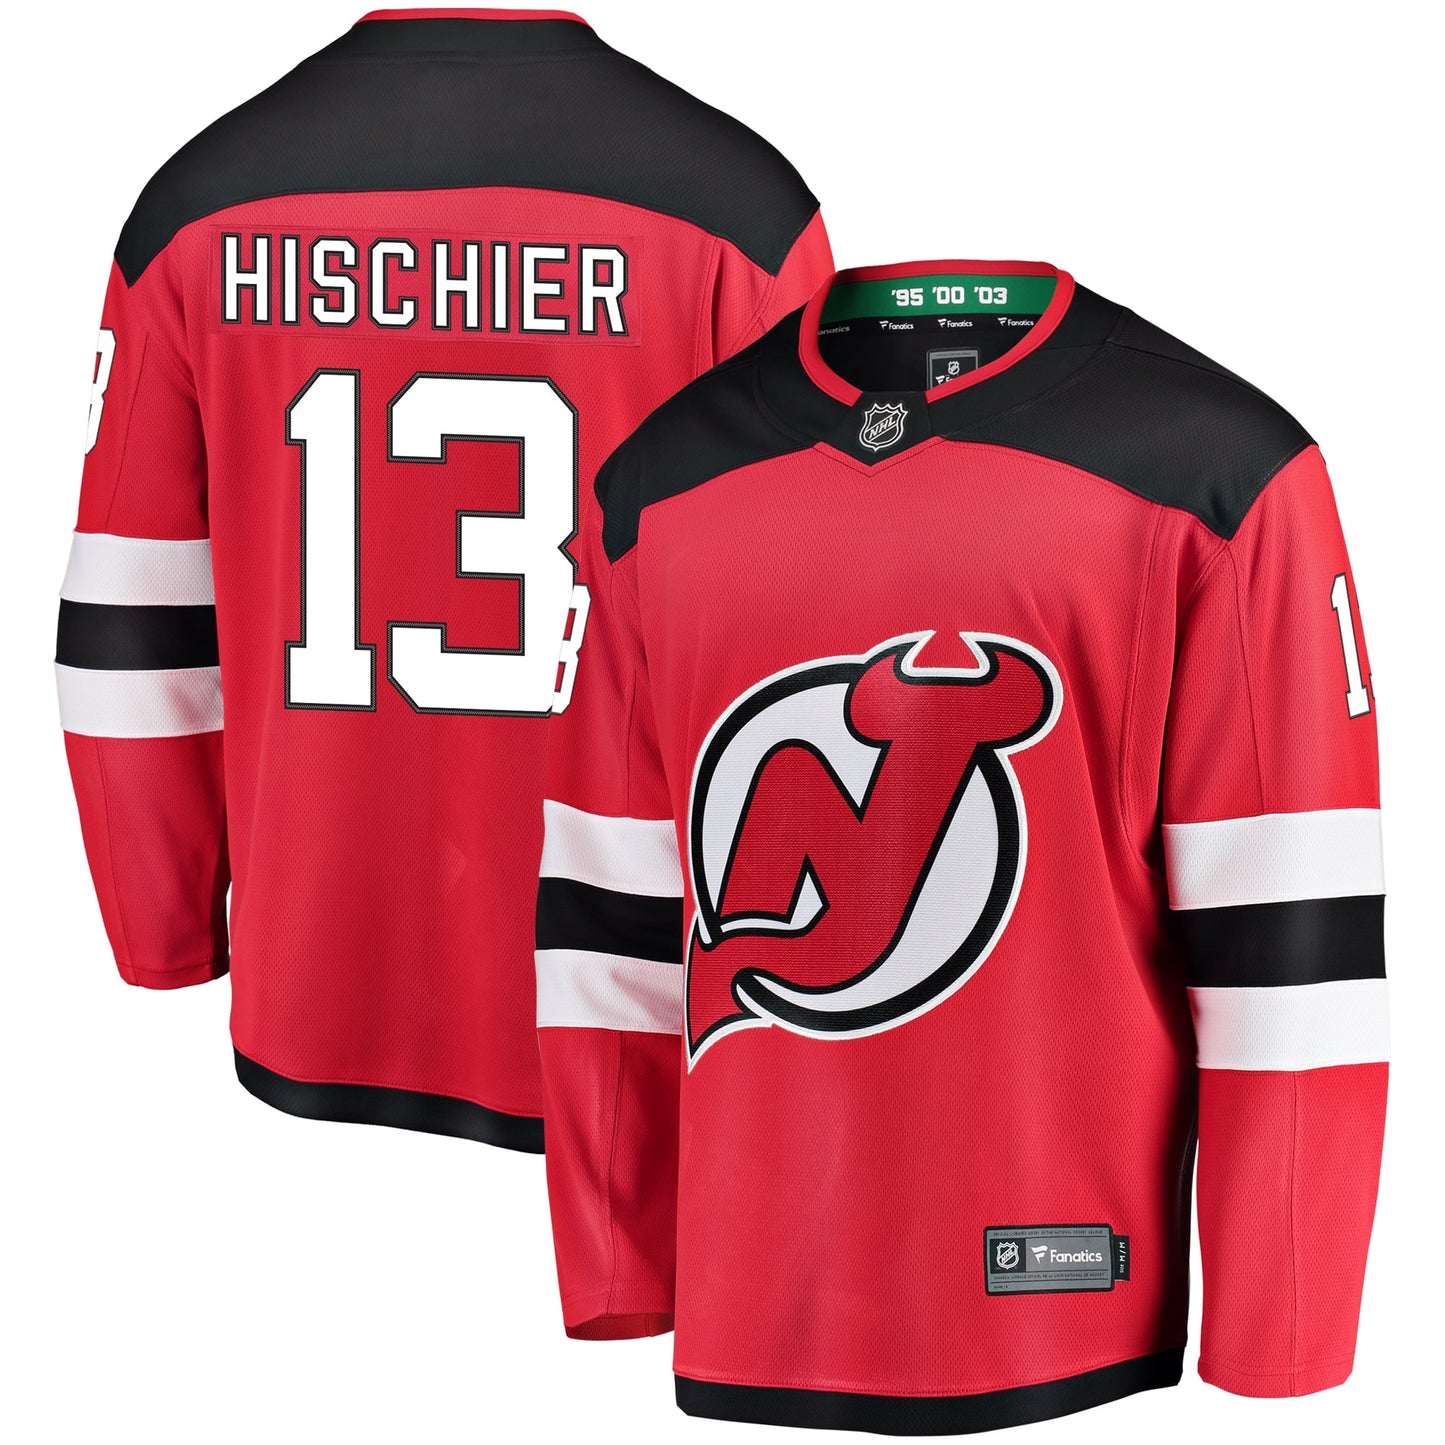 Nico Hischier New Jersey Devils Fanatics Branded Youth Home Breakaway Player Jersey - Red